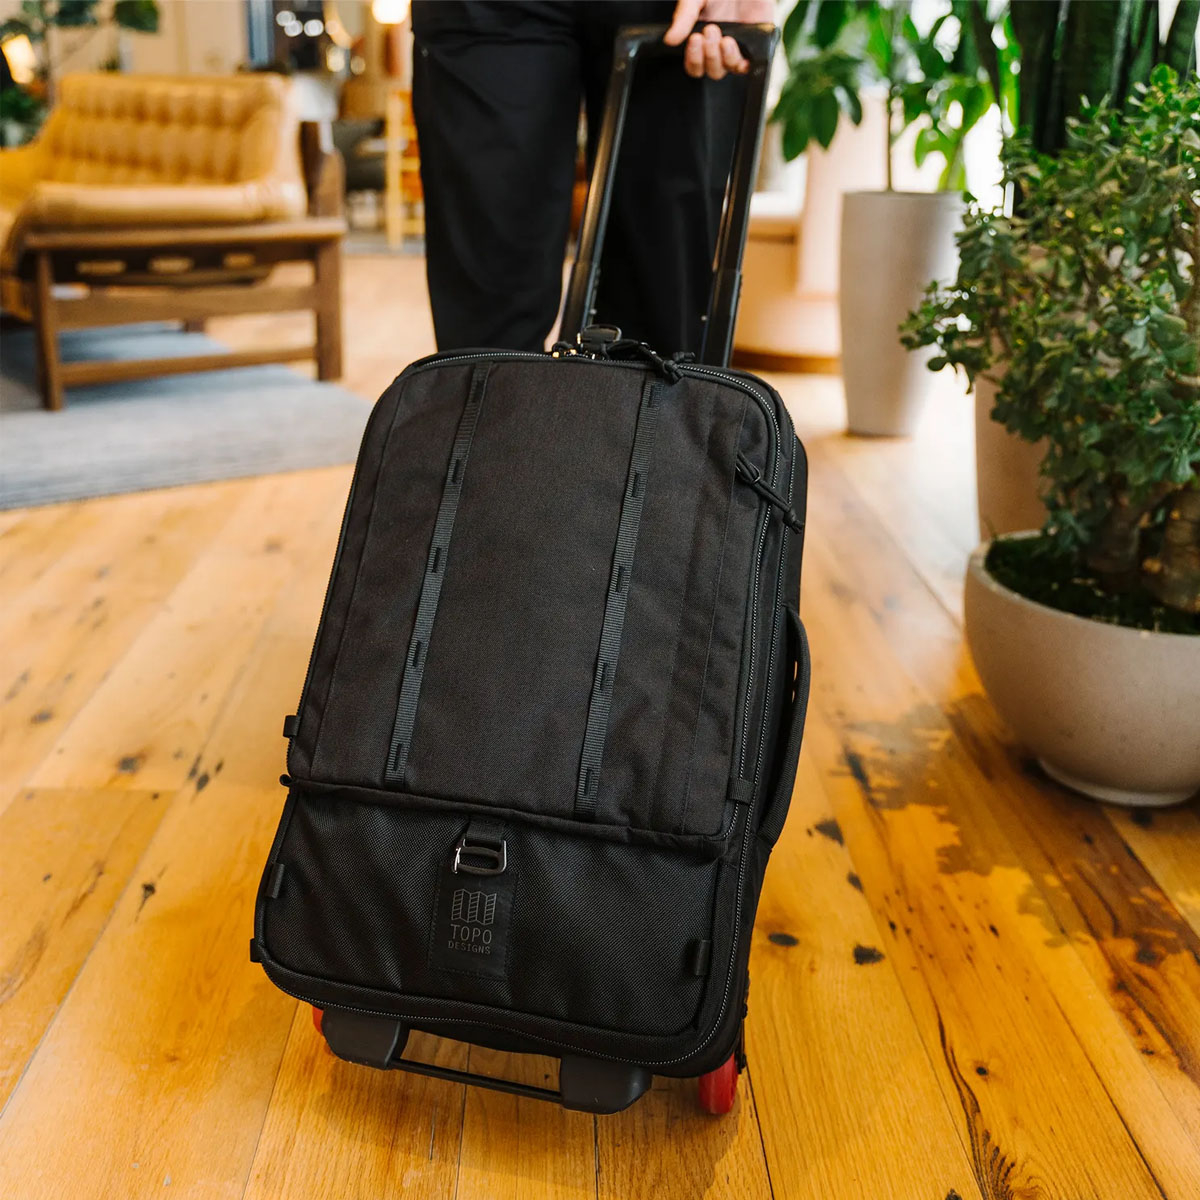 Topo Designs Global Travel Bag Roller Navy, built to travel as easy as possible